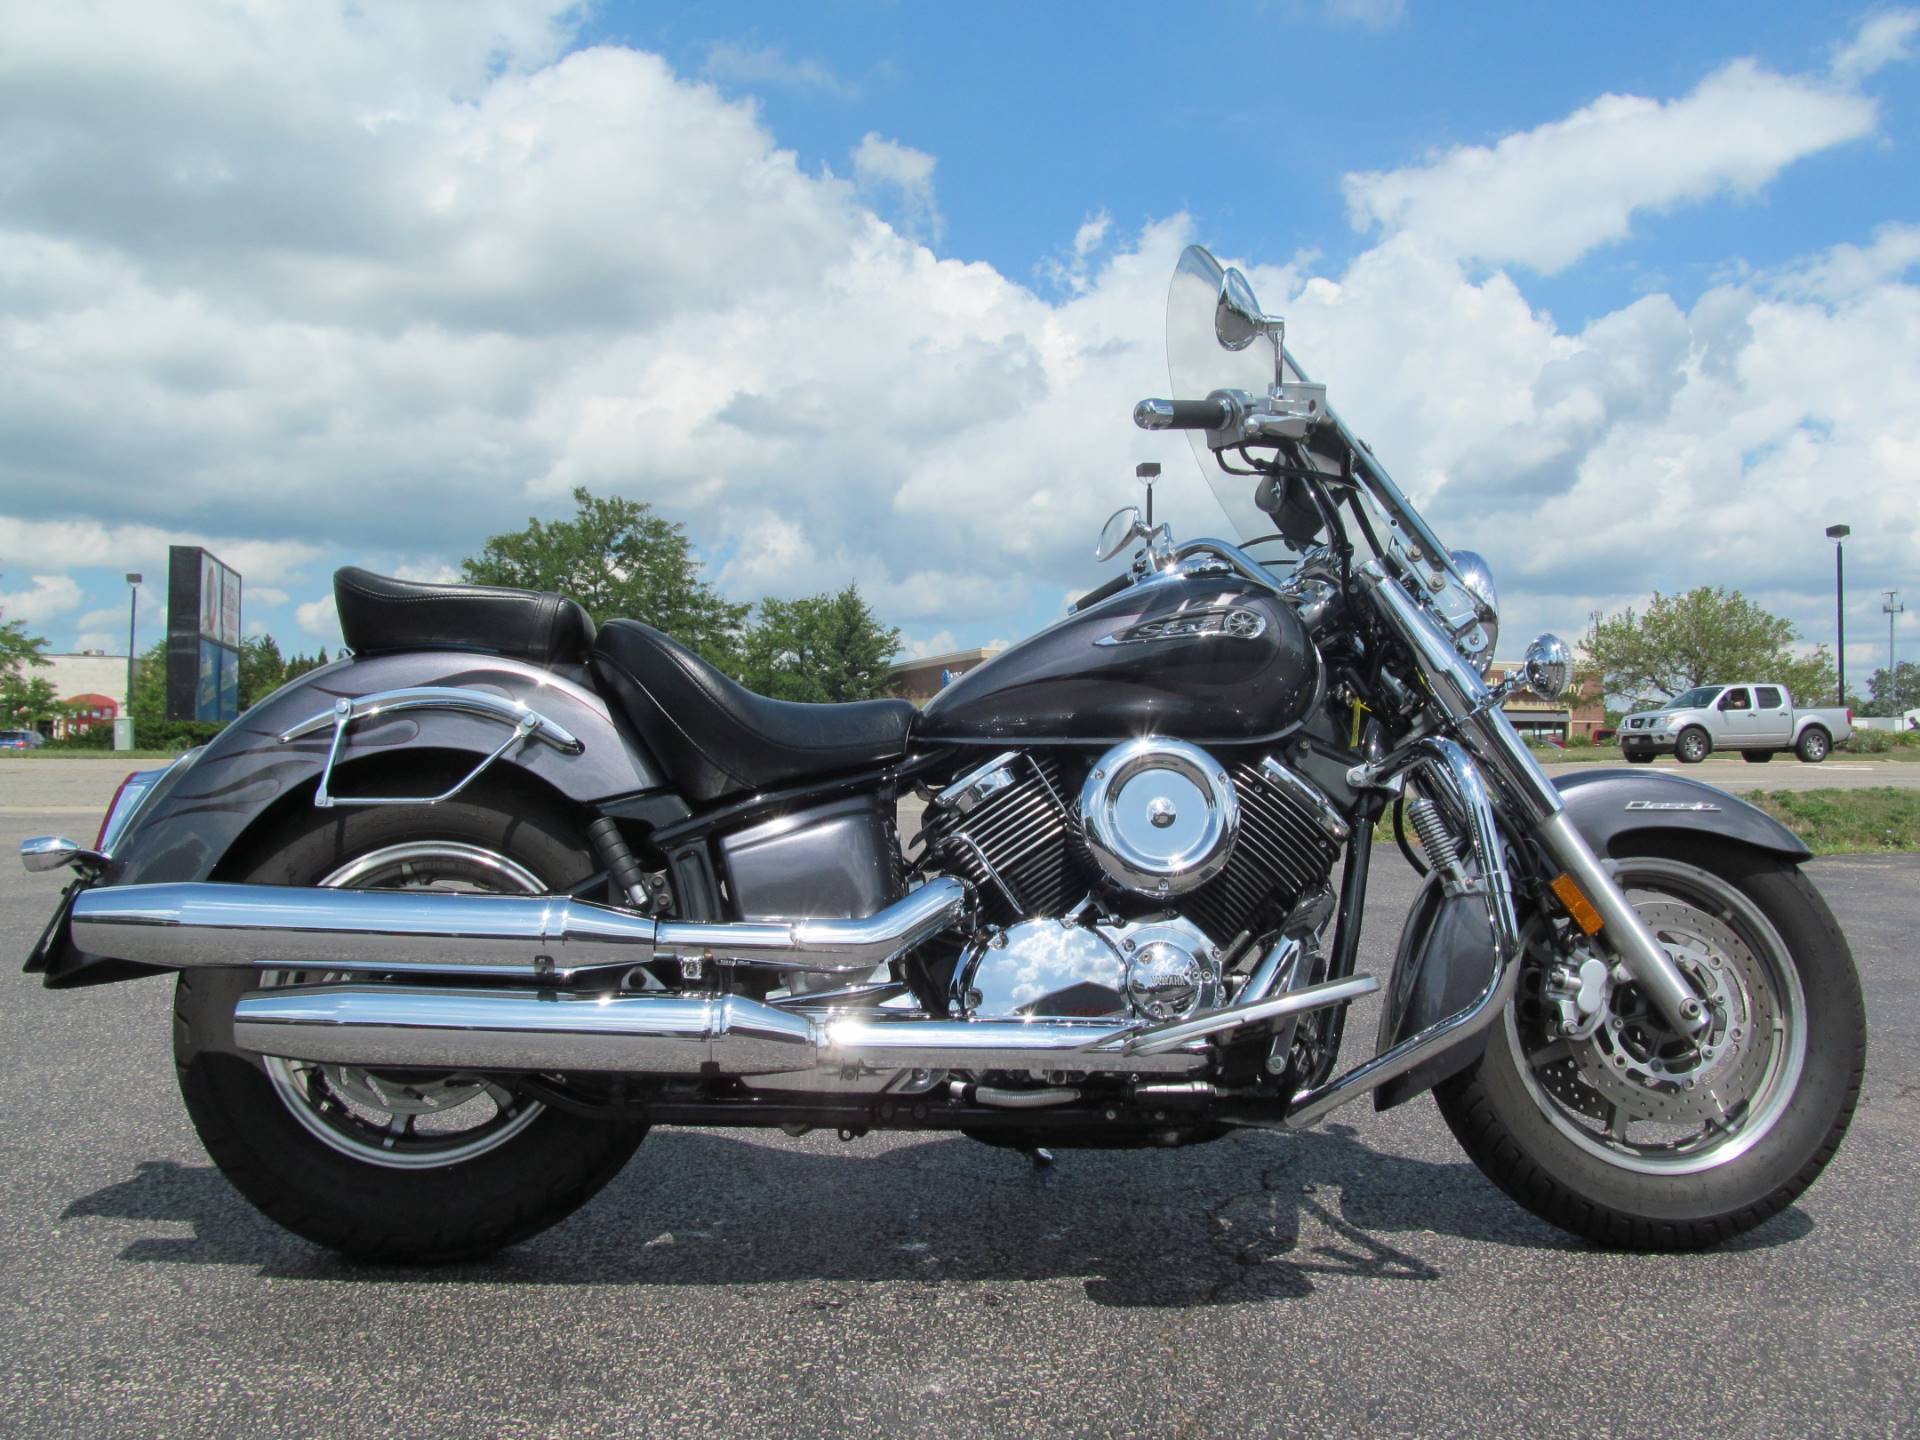 Used 2009 Yamaha V Star 1100 Classic Motorcycles In Crystal Lake Il Stock Number U5307